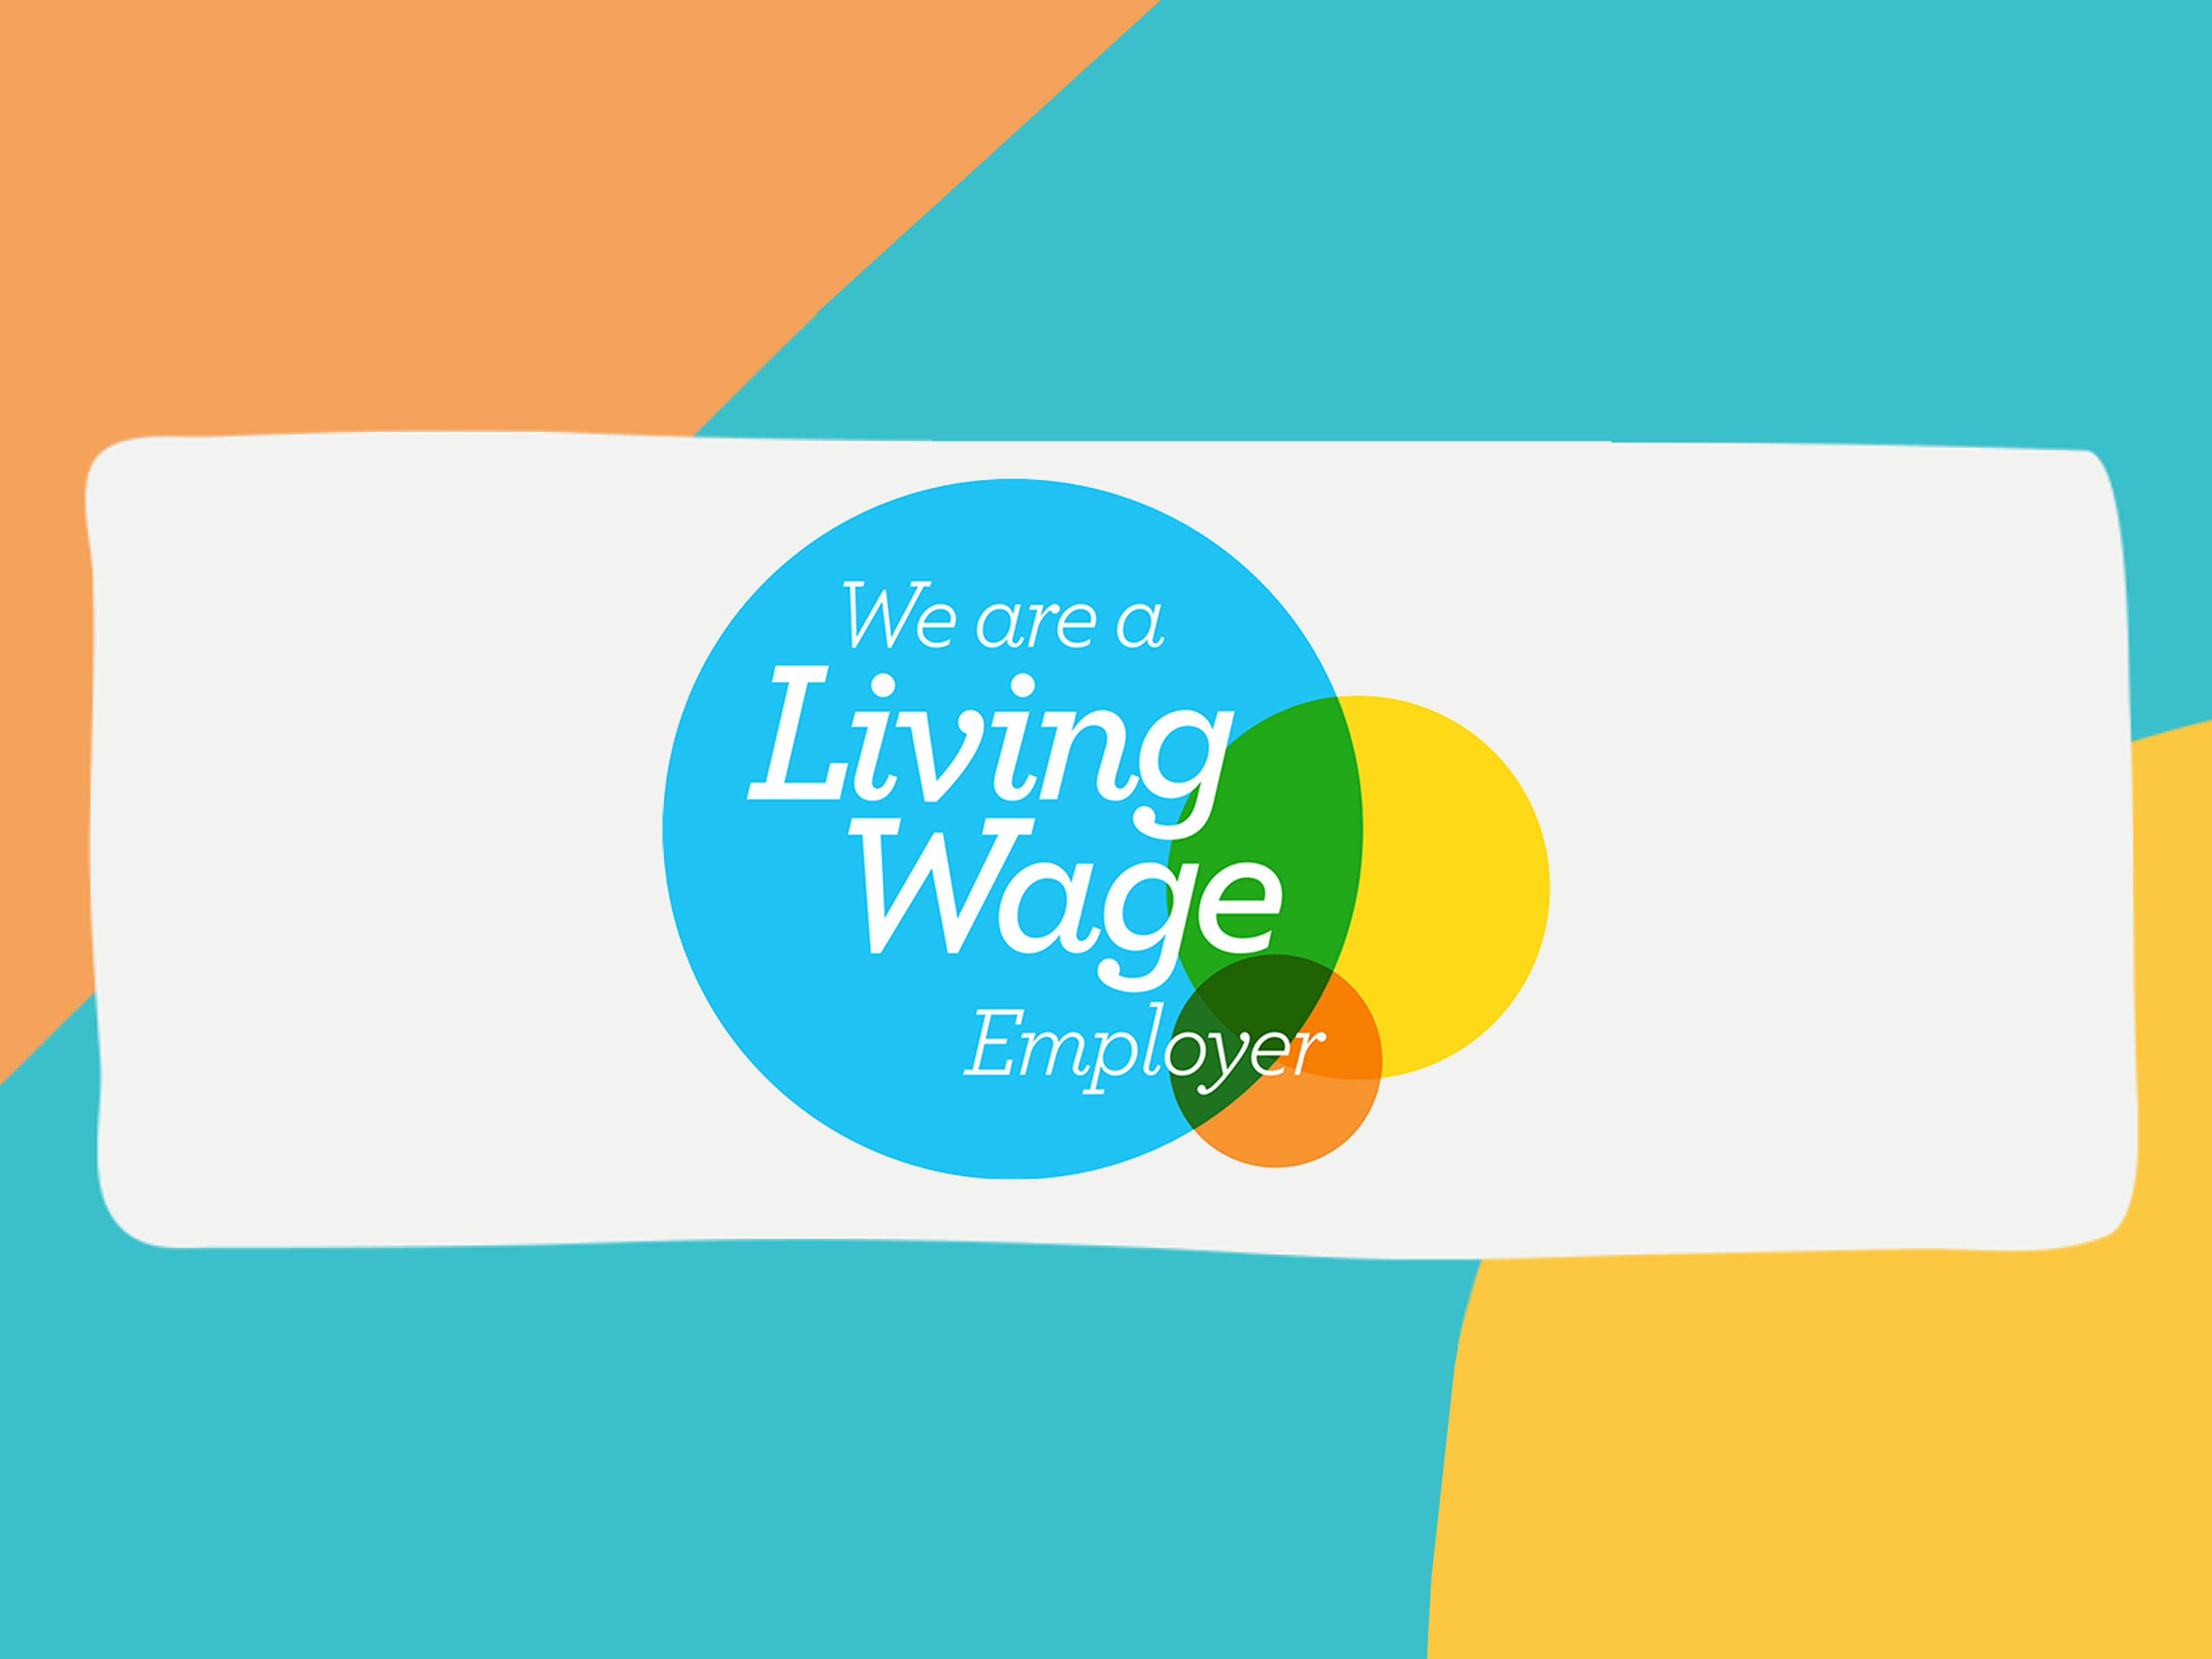 Postworks supports a real living wage for 3rd year running